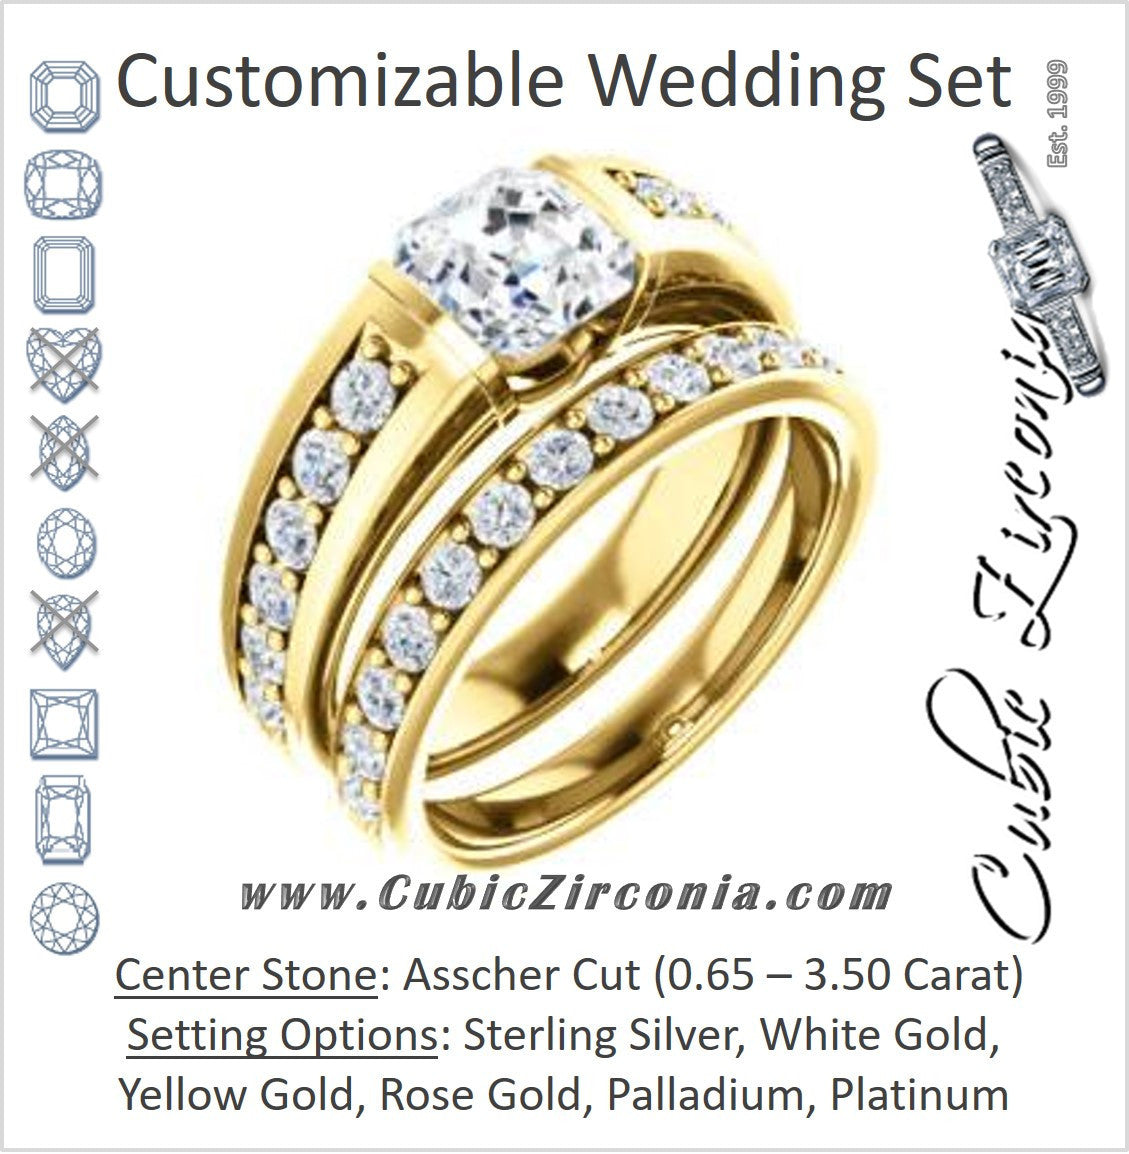 CZ Wedding Set, featuring The Rosemary engagement ring (Customizable Asscher Cut Tension Bar Set with Wide Channel/Prong Band)